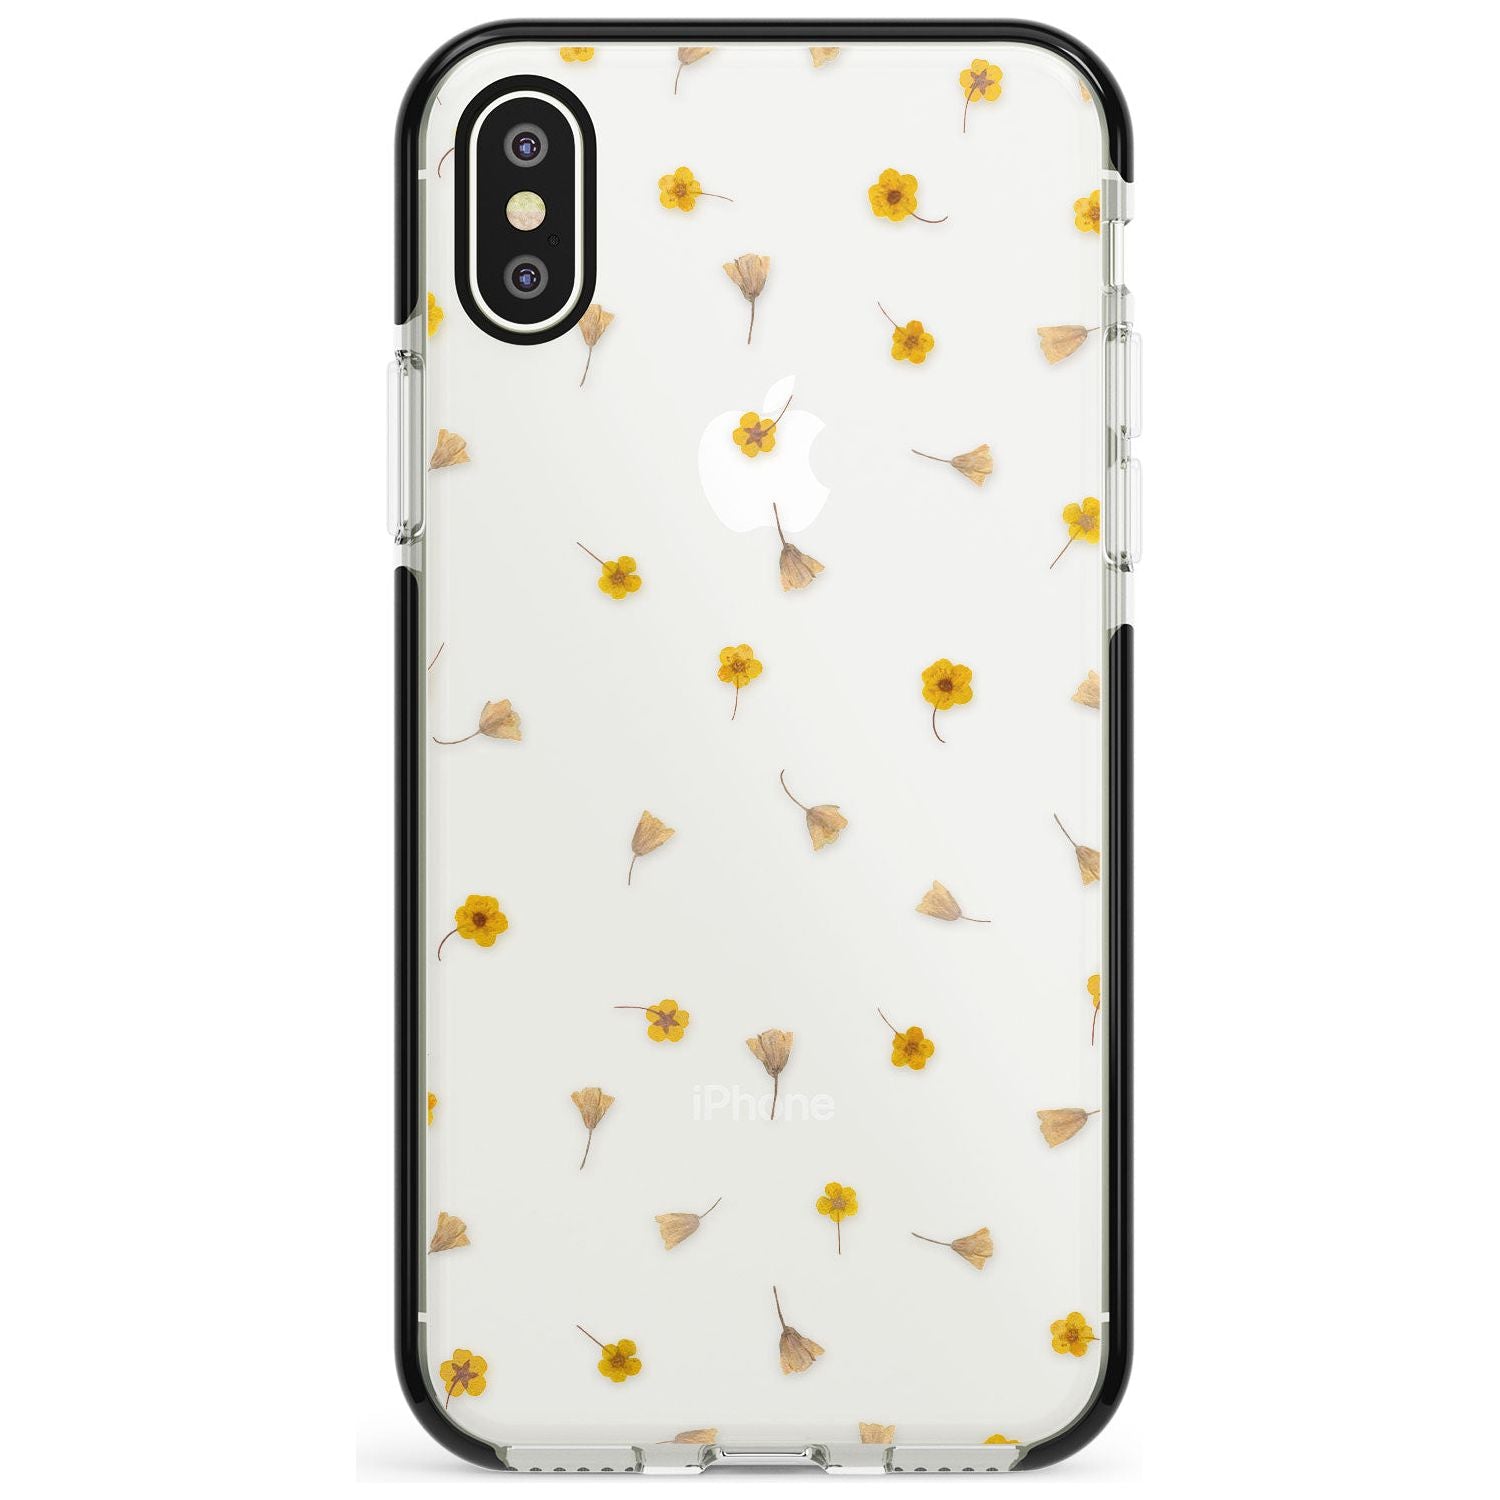 Small Flower Mix - Dried Flower-Inspired Design Black Impact Phone Case for iPhone X XS Max XR